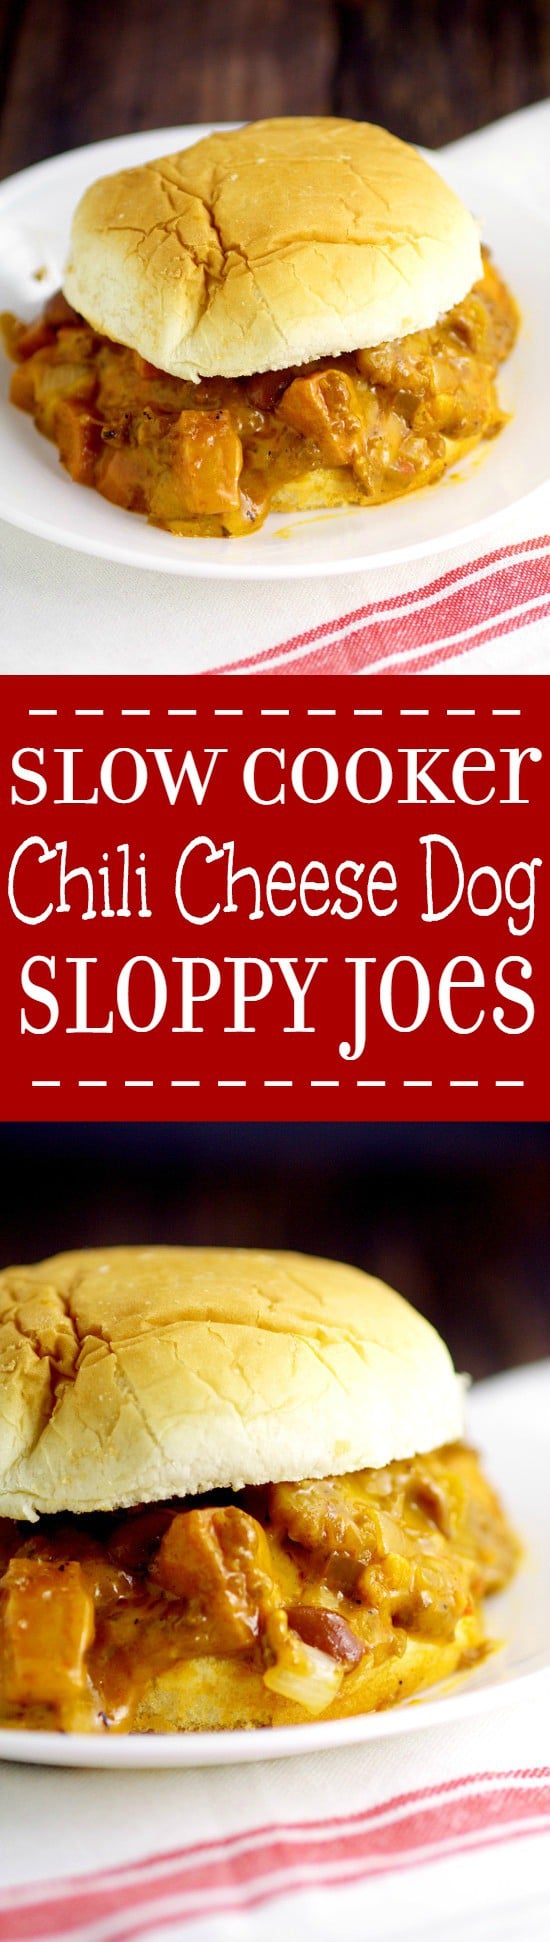 Easy Family Dinner Recipe - Slow Cooker Chili Cheese Dog Sloppy Joes.  Classic chili cheese dogs and sloppy joes join forces in these Slow Cooker Chili Cheese Dog Sloppy Joes to make a gooey, cheesy, cozy, comfort food meal in the Crockpot.  OMG. This looks amazing!